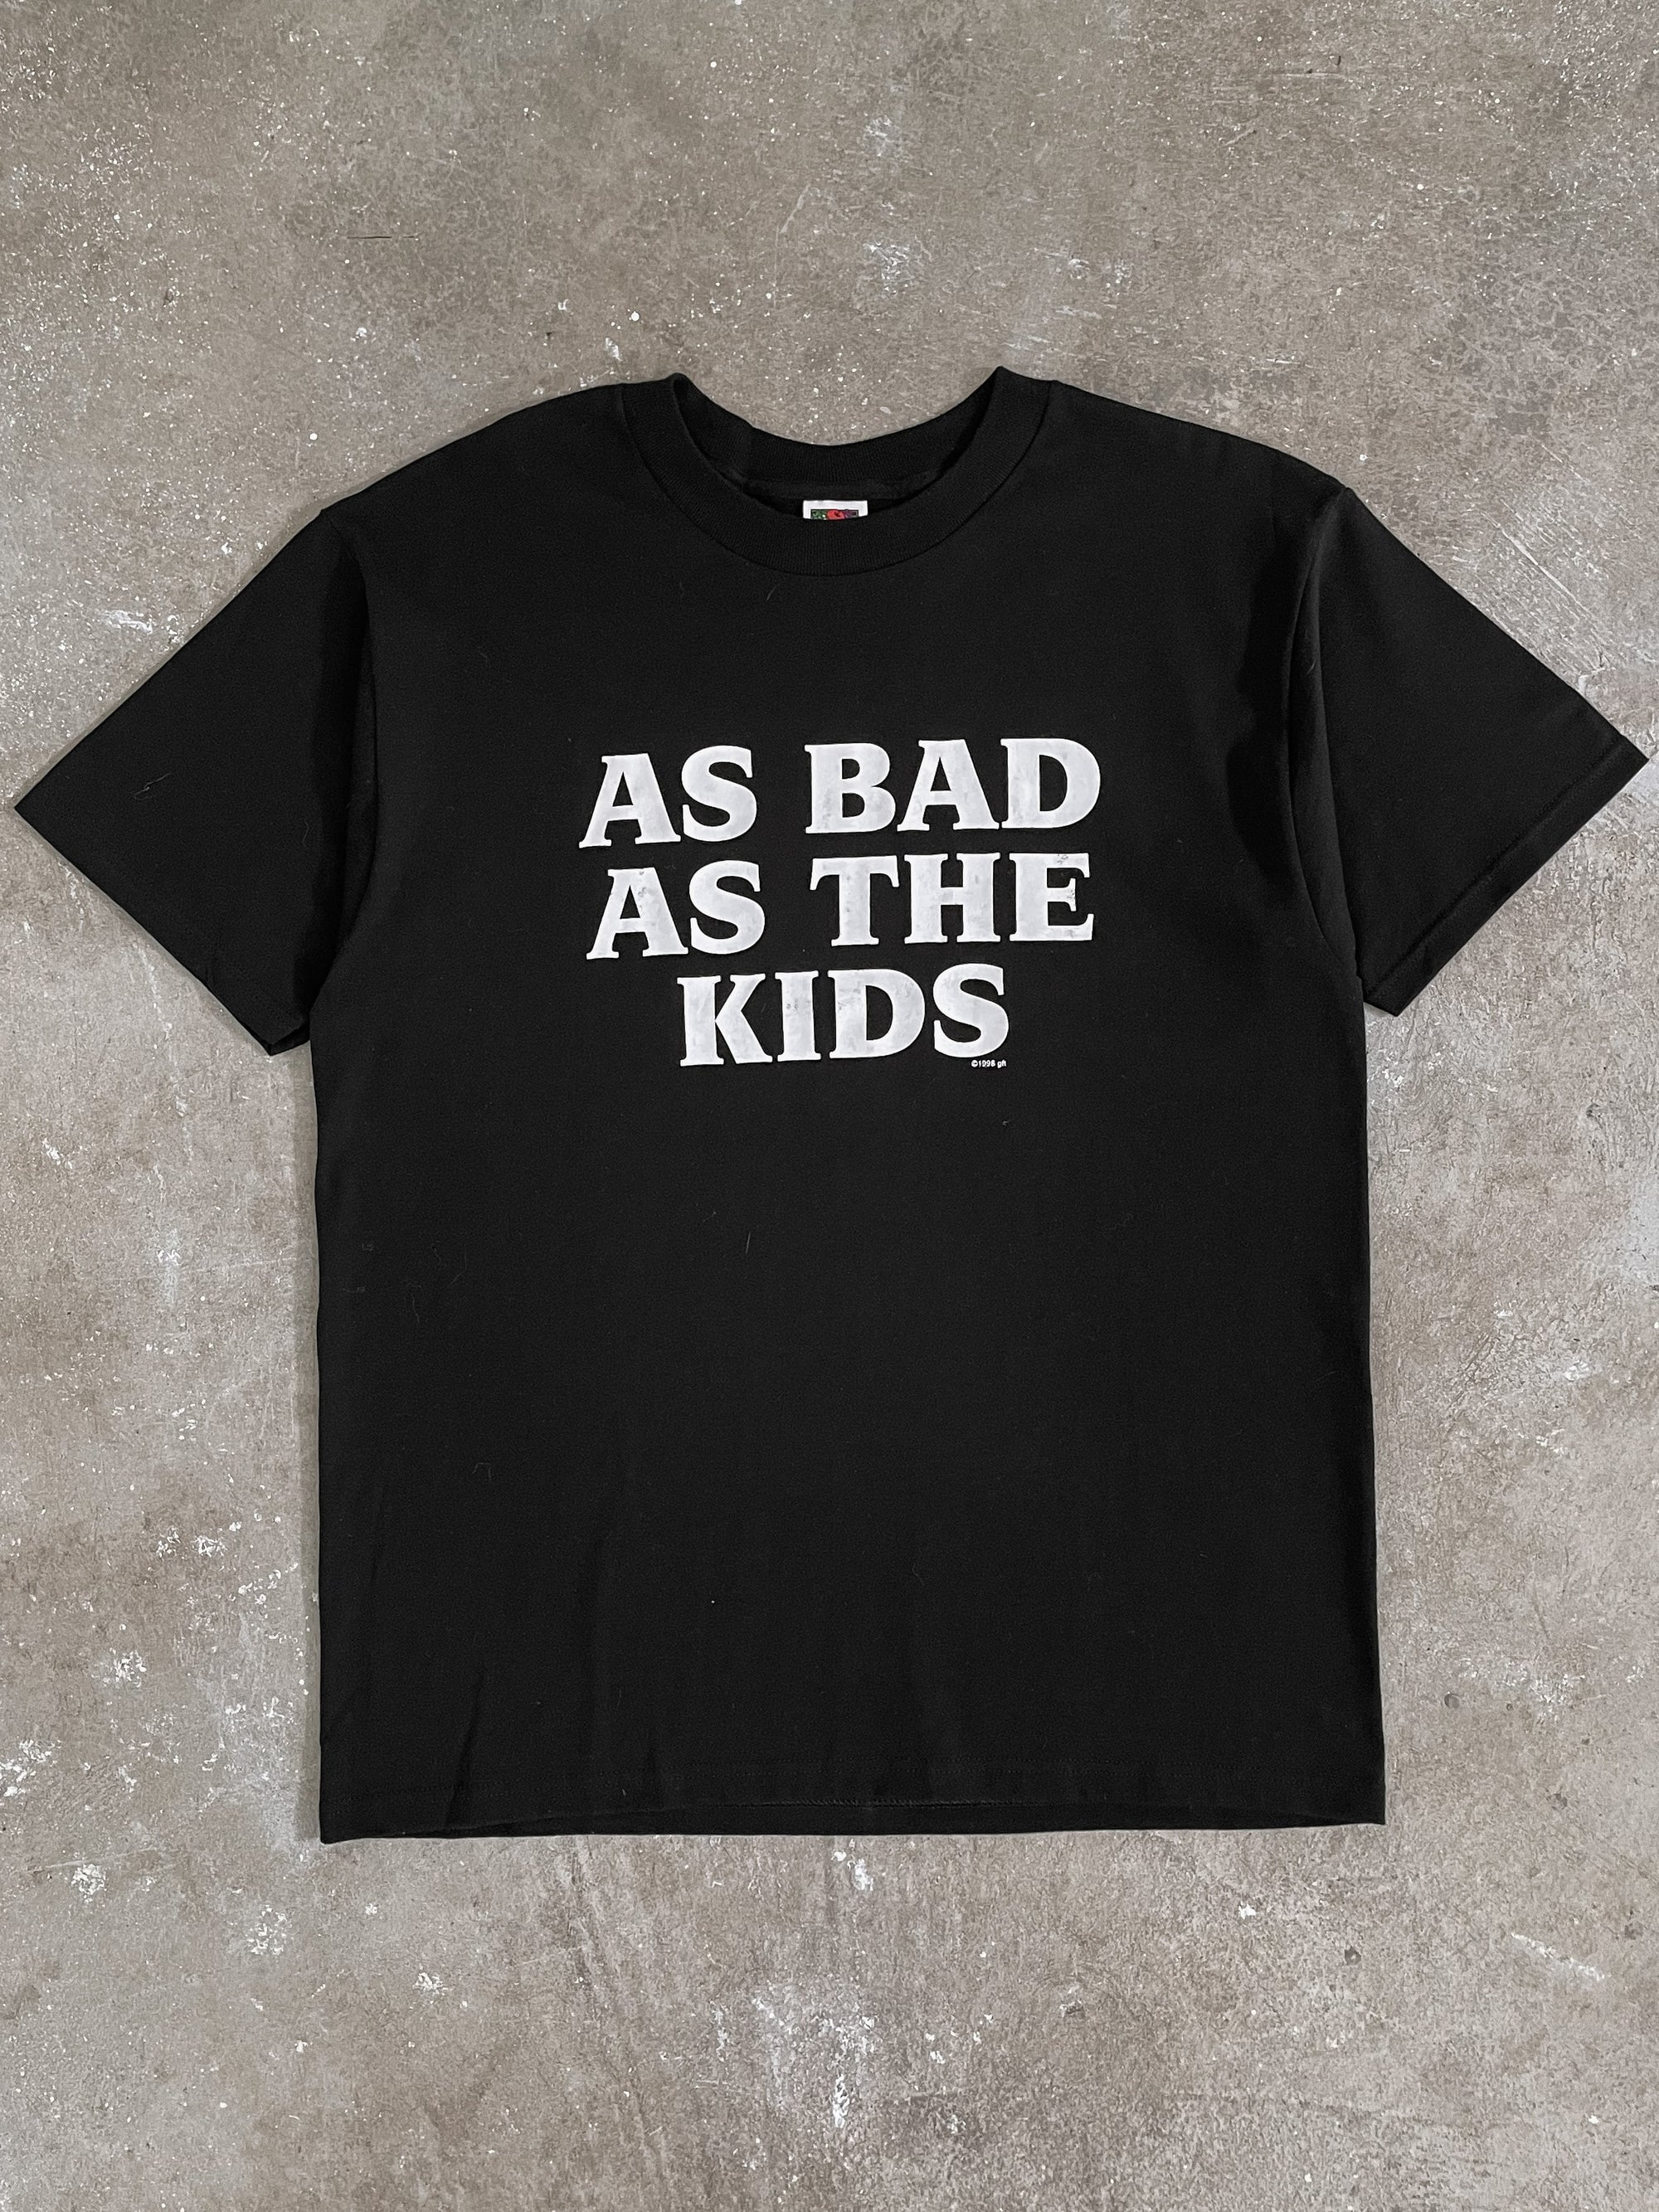 1990s “As Bad As The Kids” Tee (L)